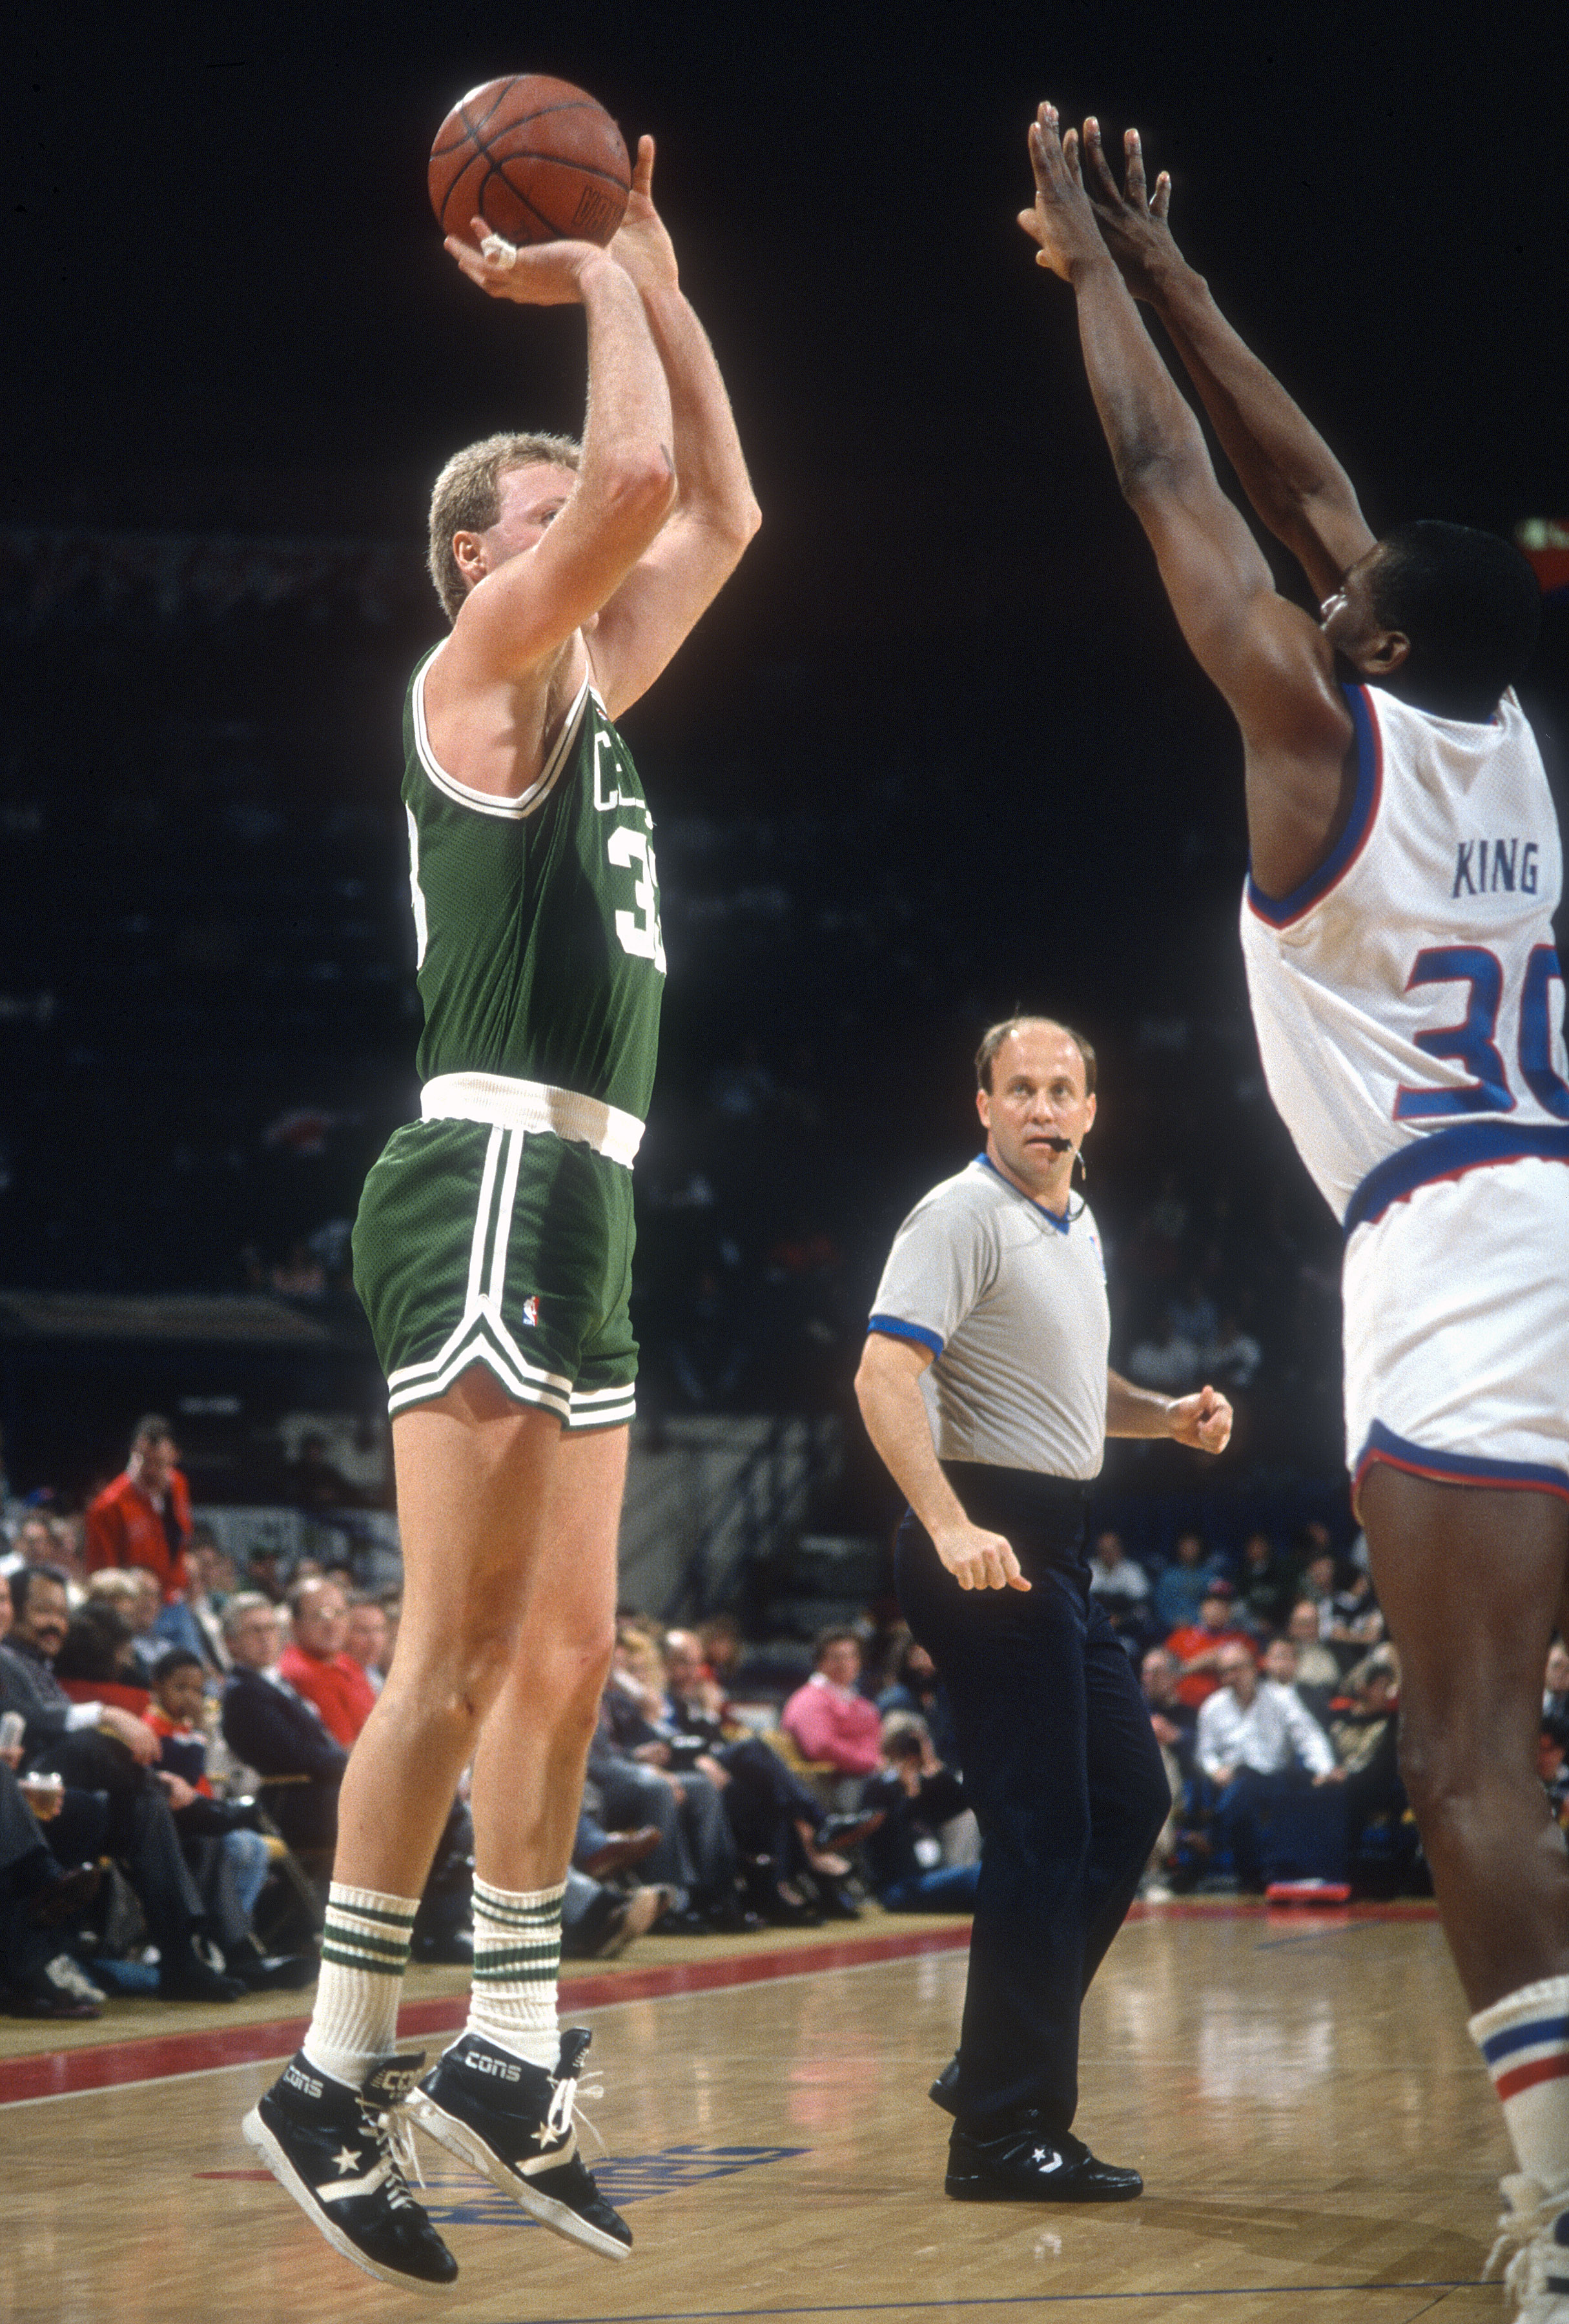 This is a photo of Larry Bird in his 1990 season with the Celtics.